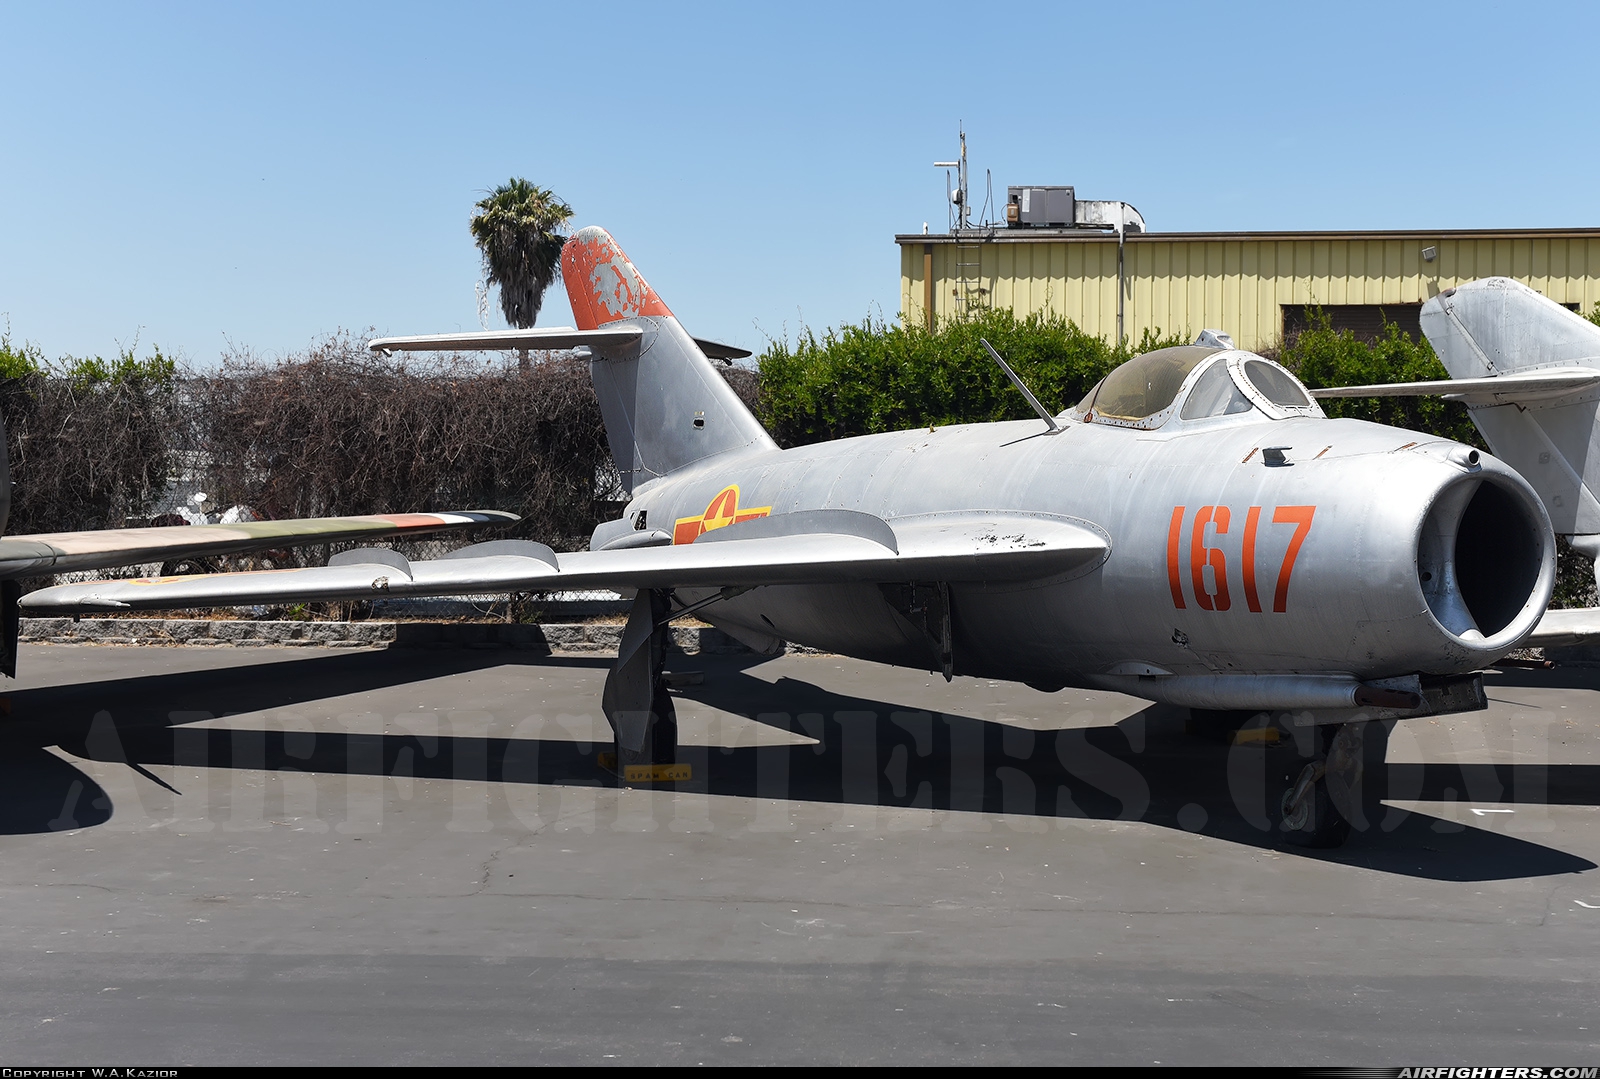 Private - Planes of Fame Air Museum Mikoyan-Gurevich Lim-5P 1617 at Chino (CNO), USA